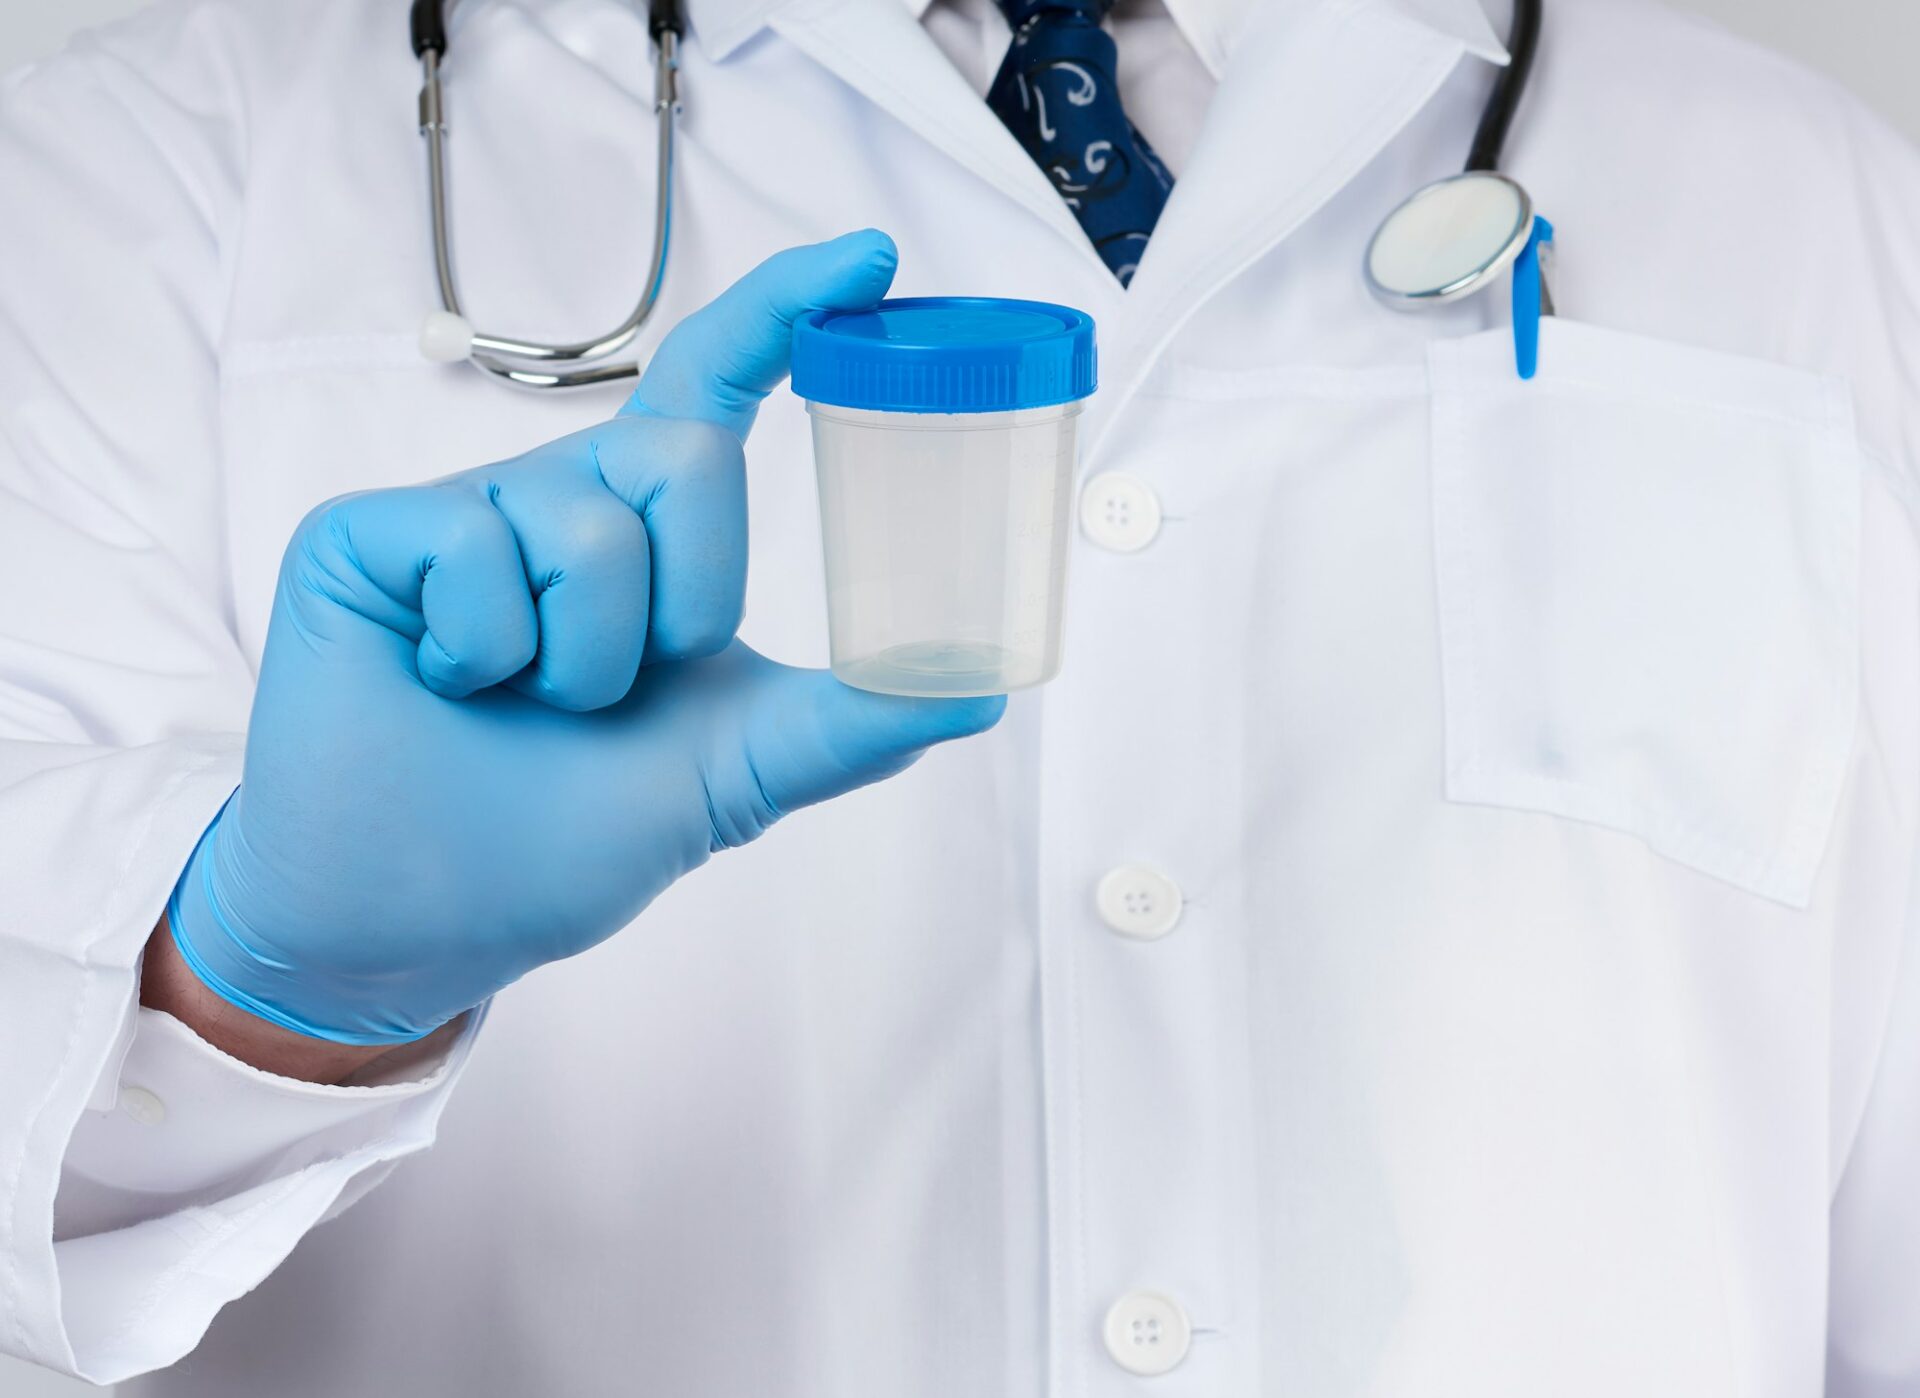 Male doctor in a white coat and tie stands and holds a plastic container for urine specimen